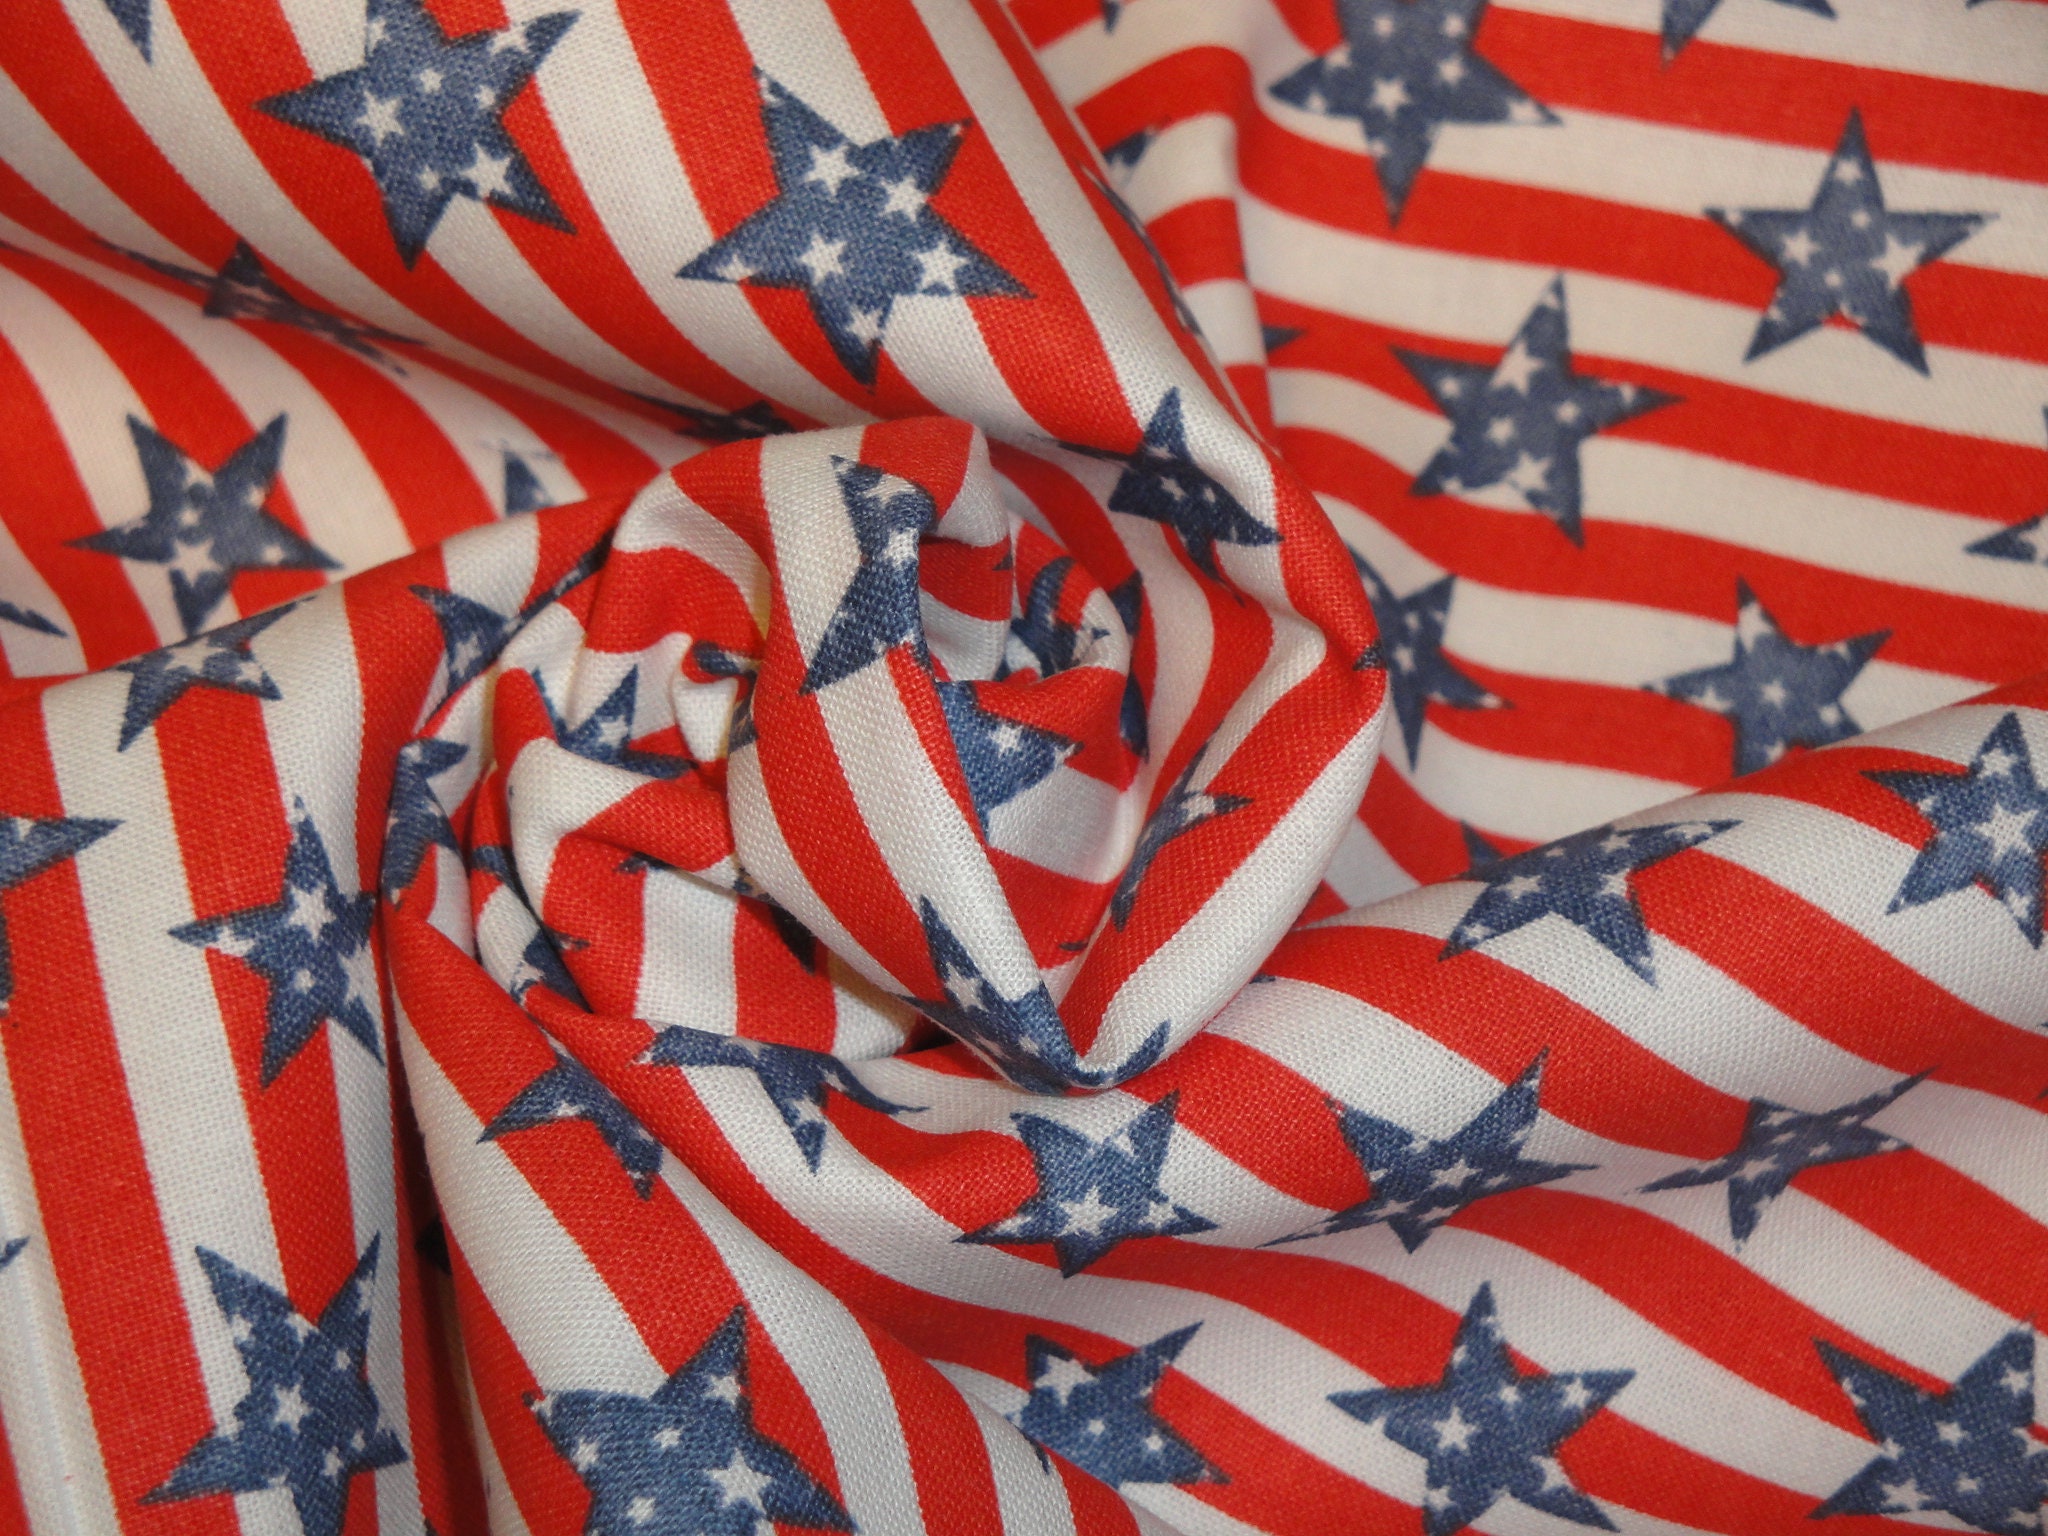 Blue Stars And Dots Cotton Patriotic Print Fabric Sold By The Yard -  Kittredge Mercantile